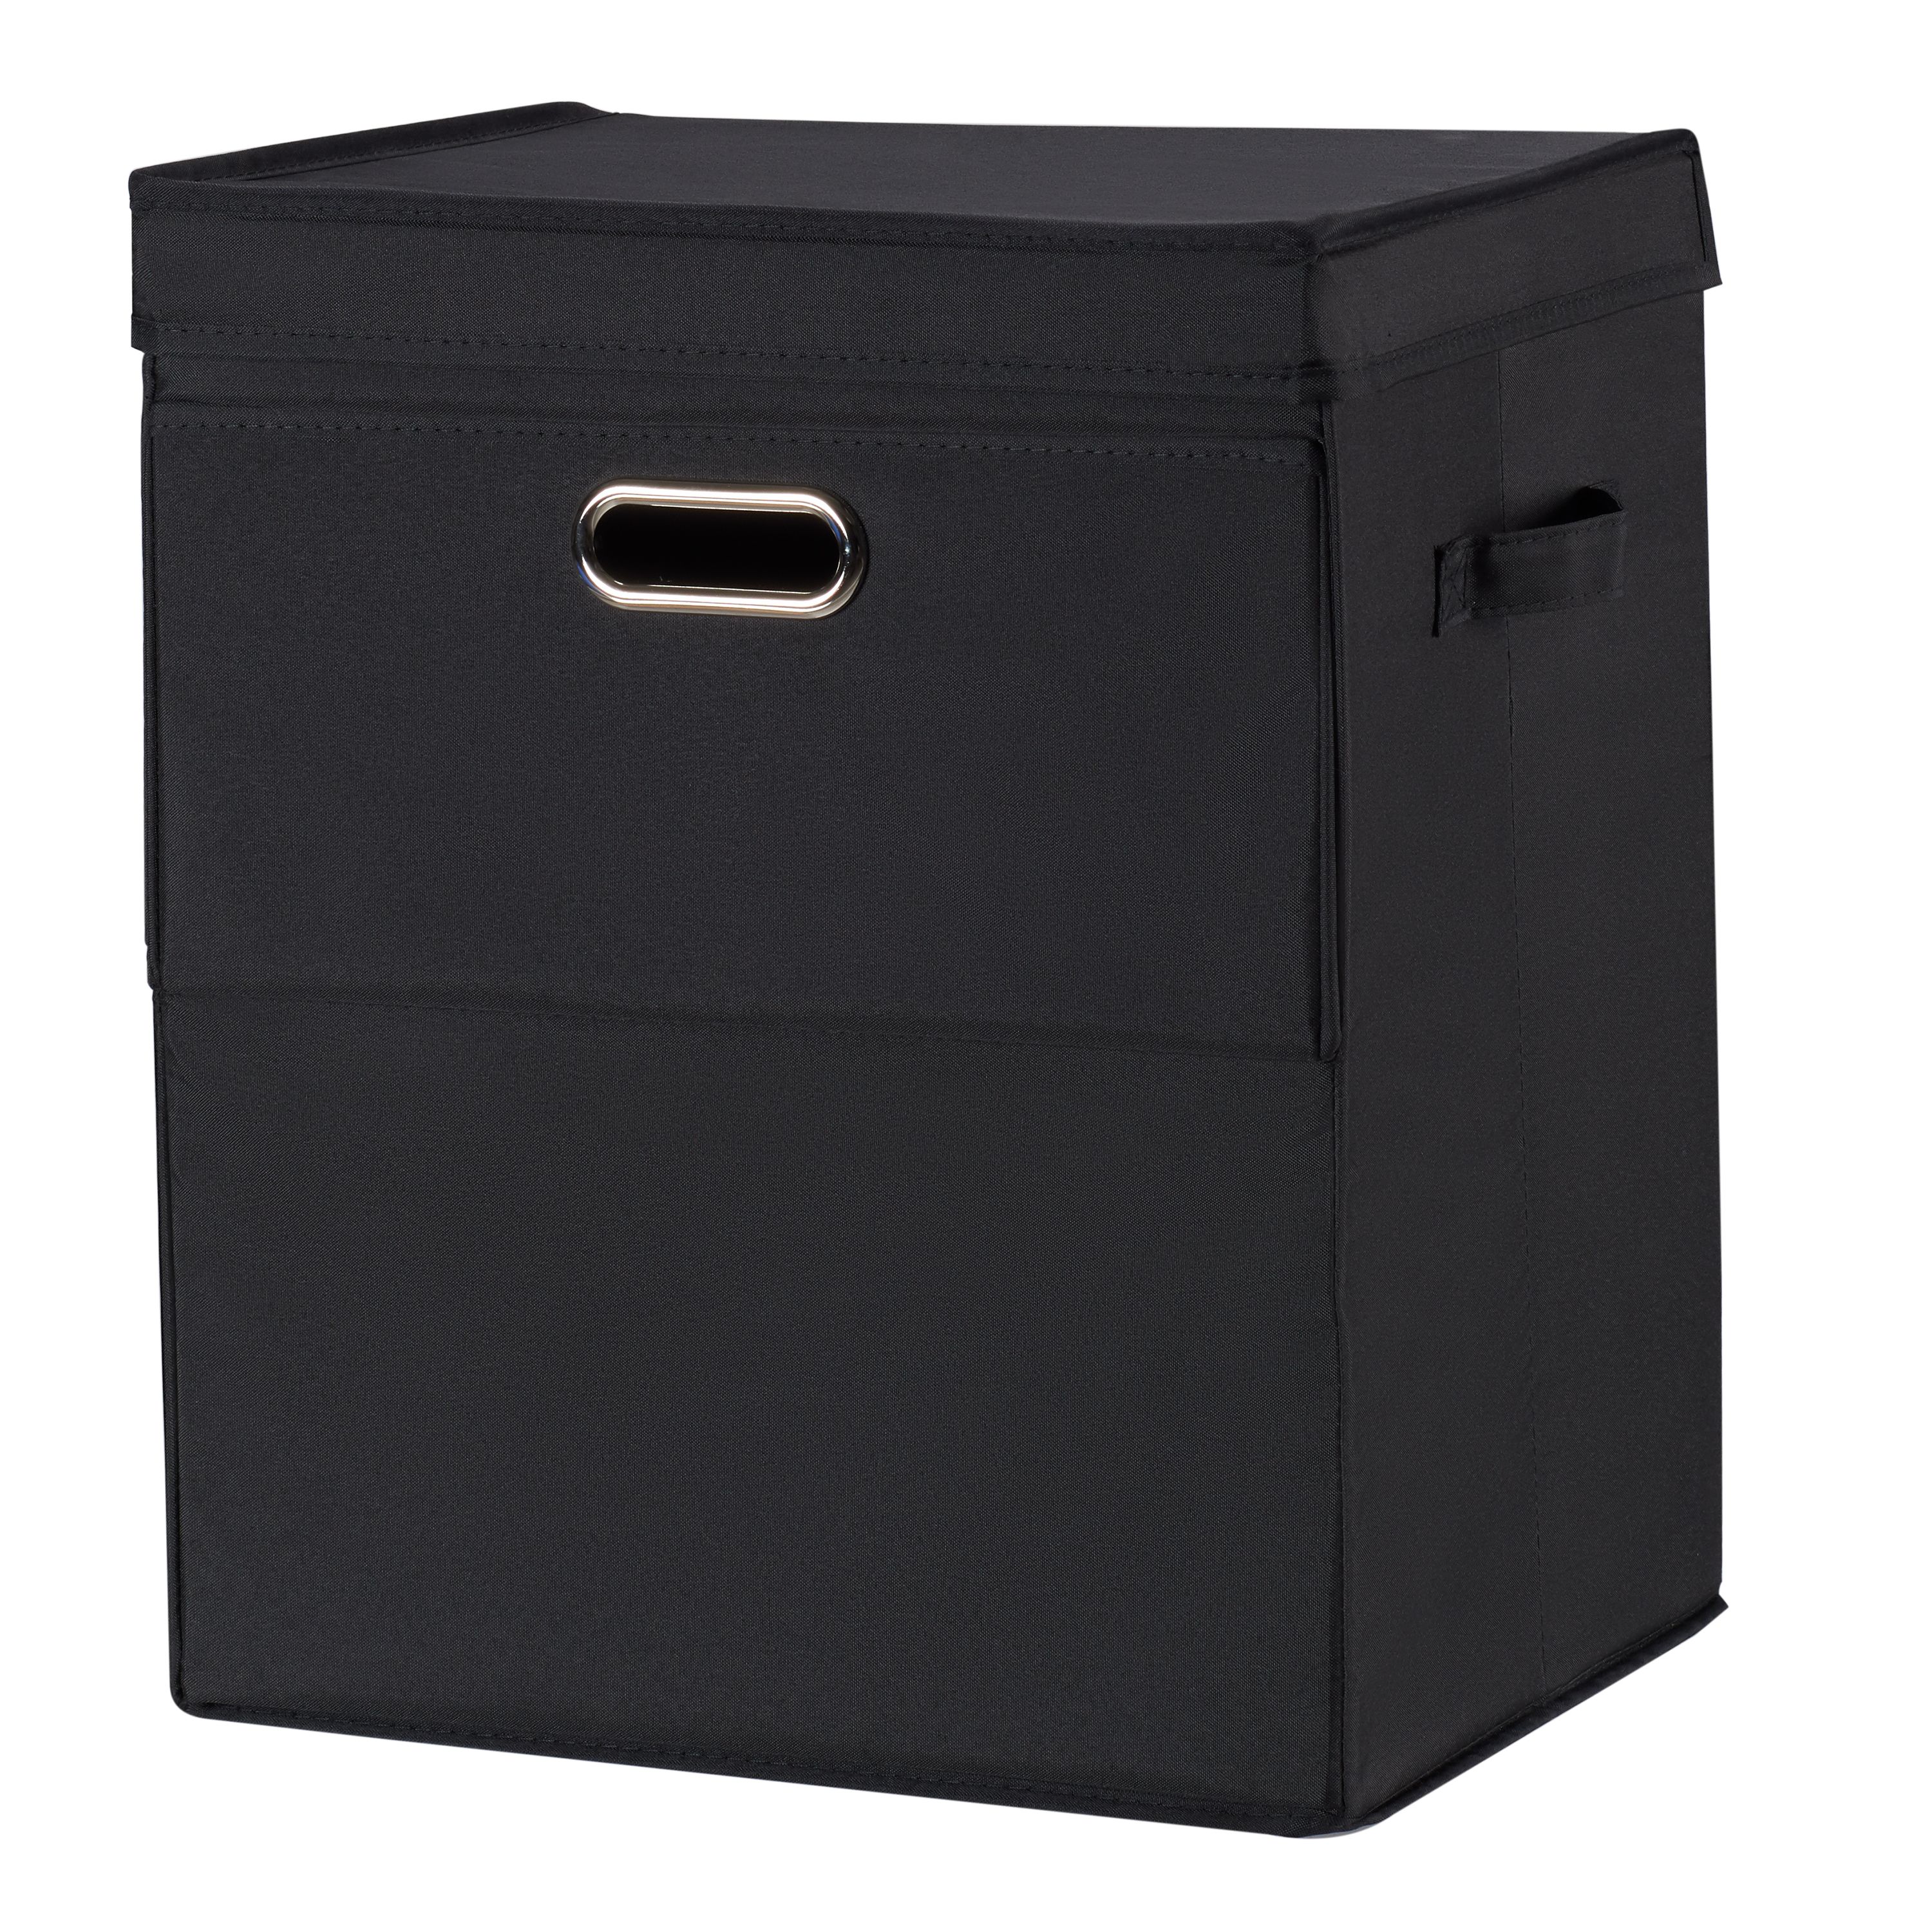 Mainstays Stackable Laundry Hamper with Lid, Black - image 1 of 4